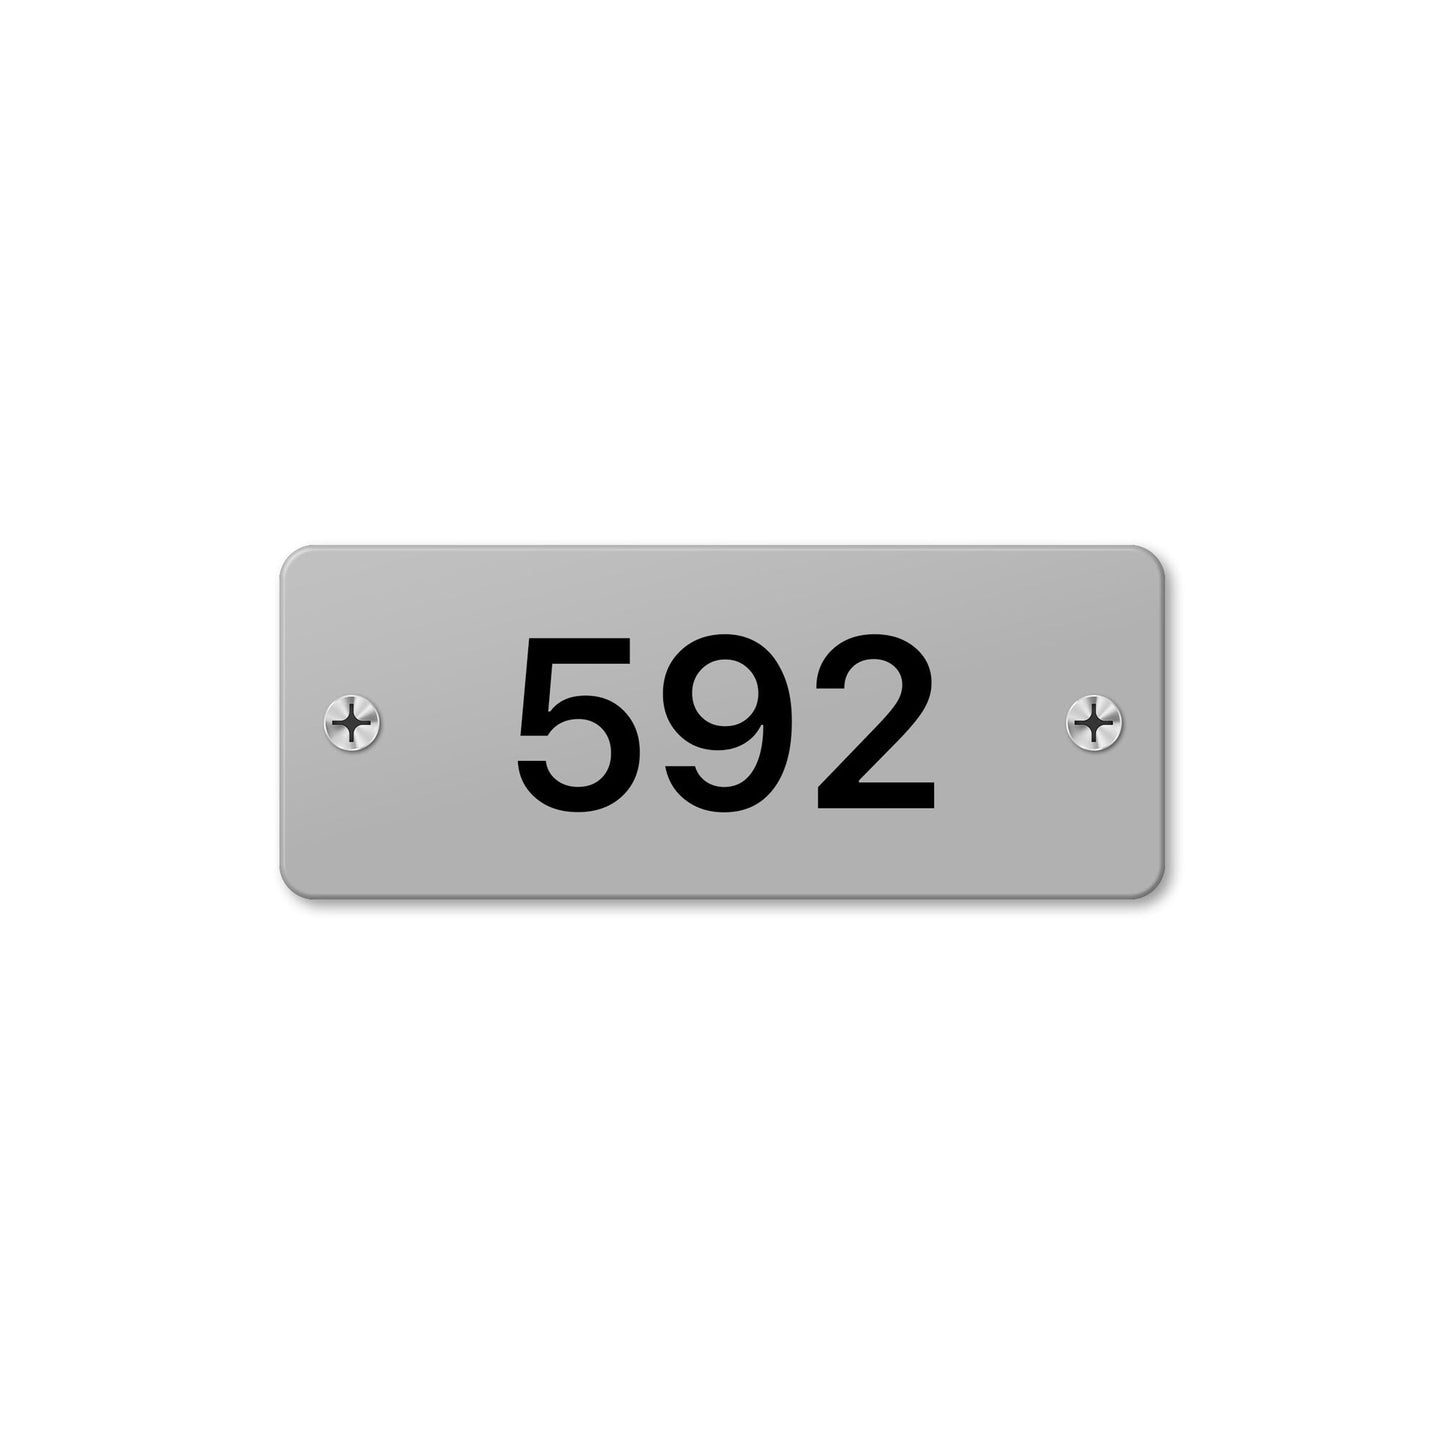 Numeral 592